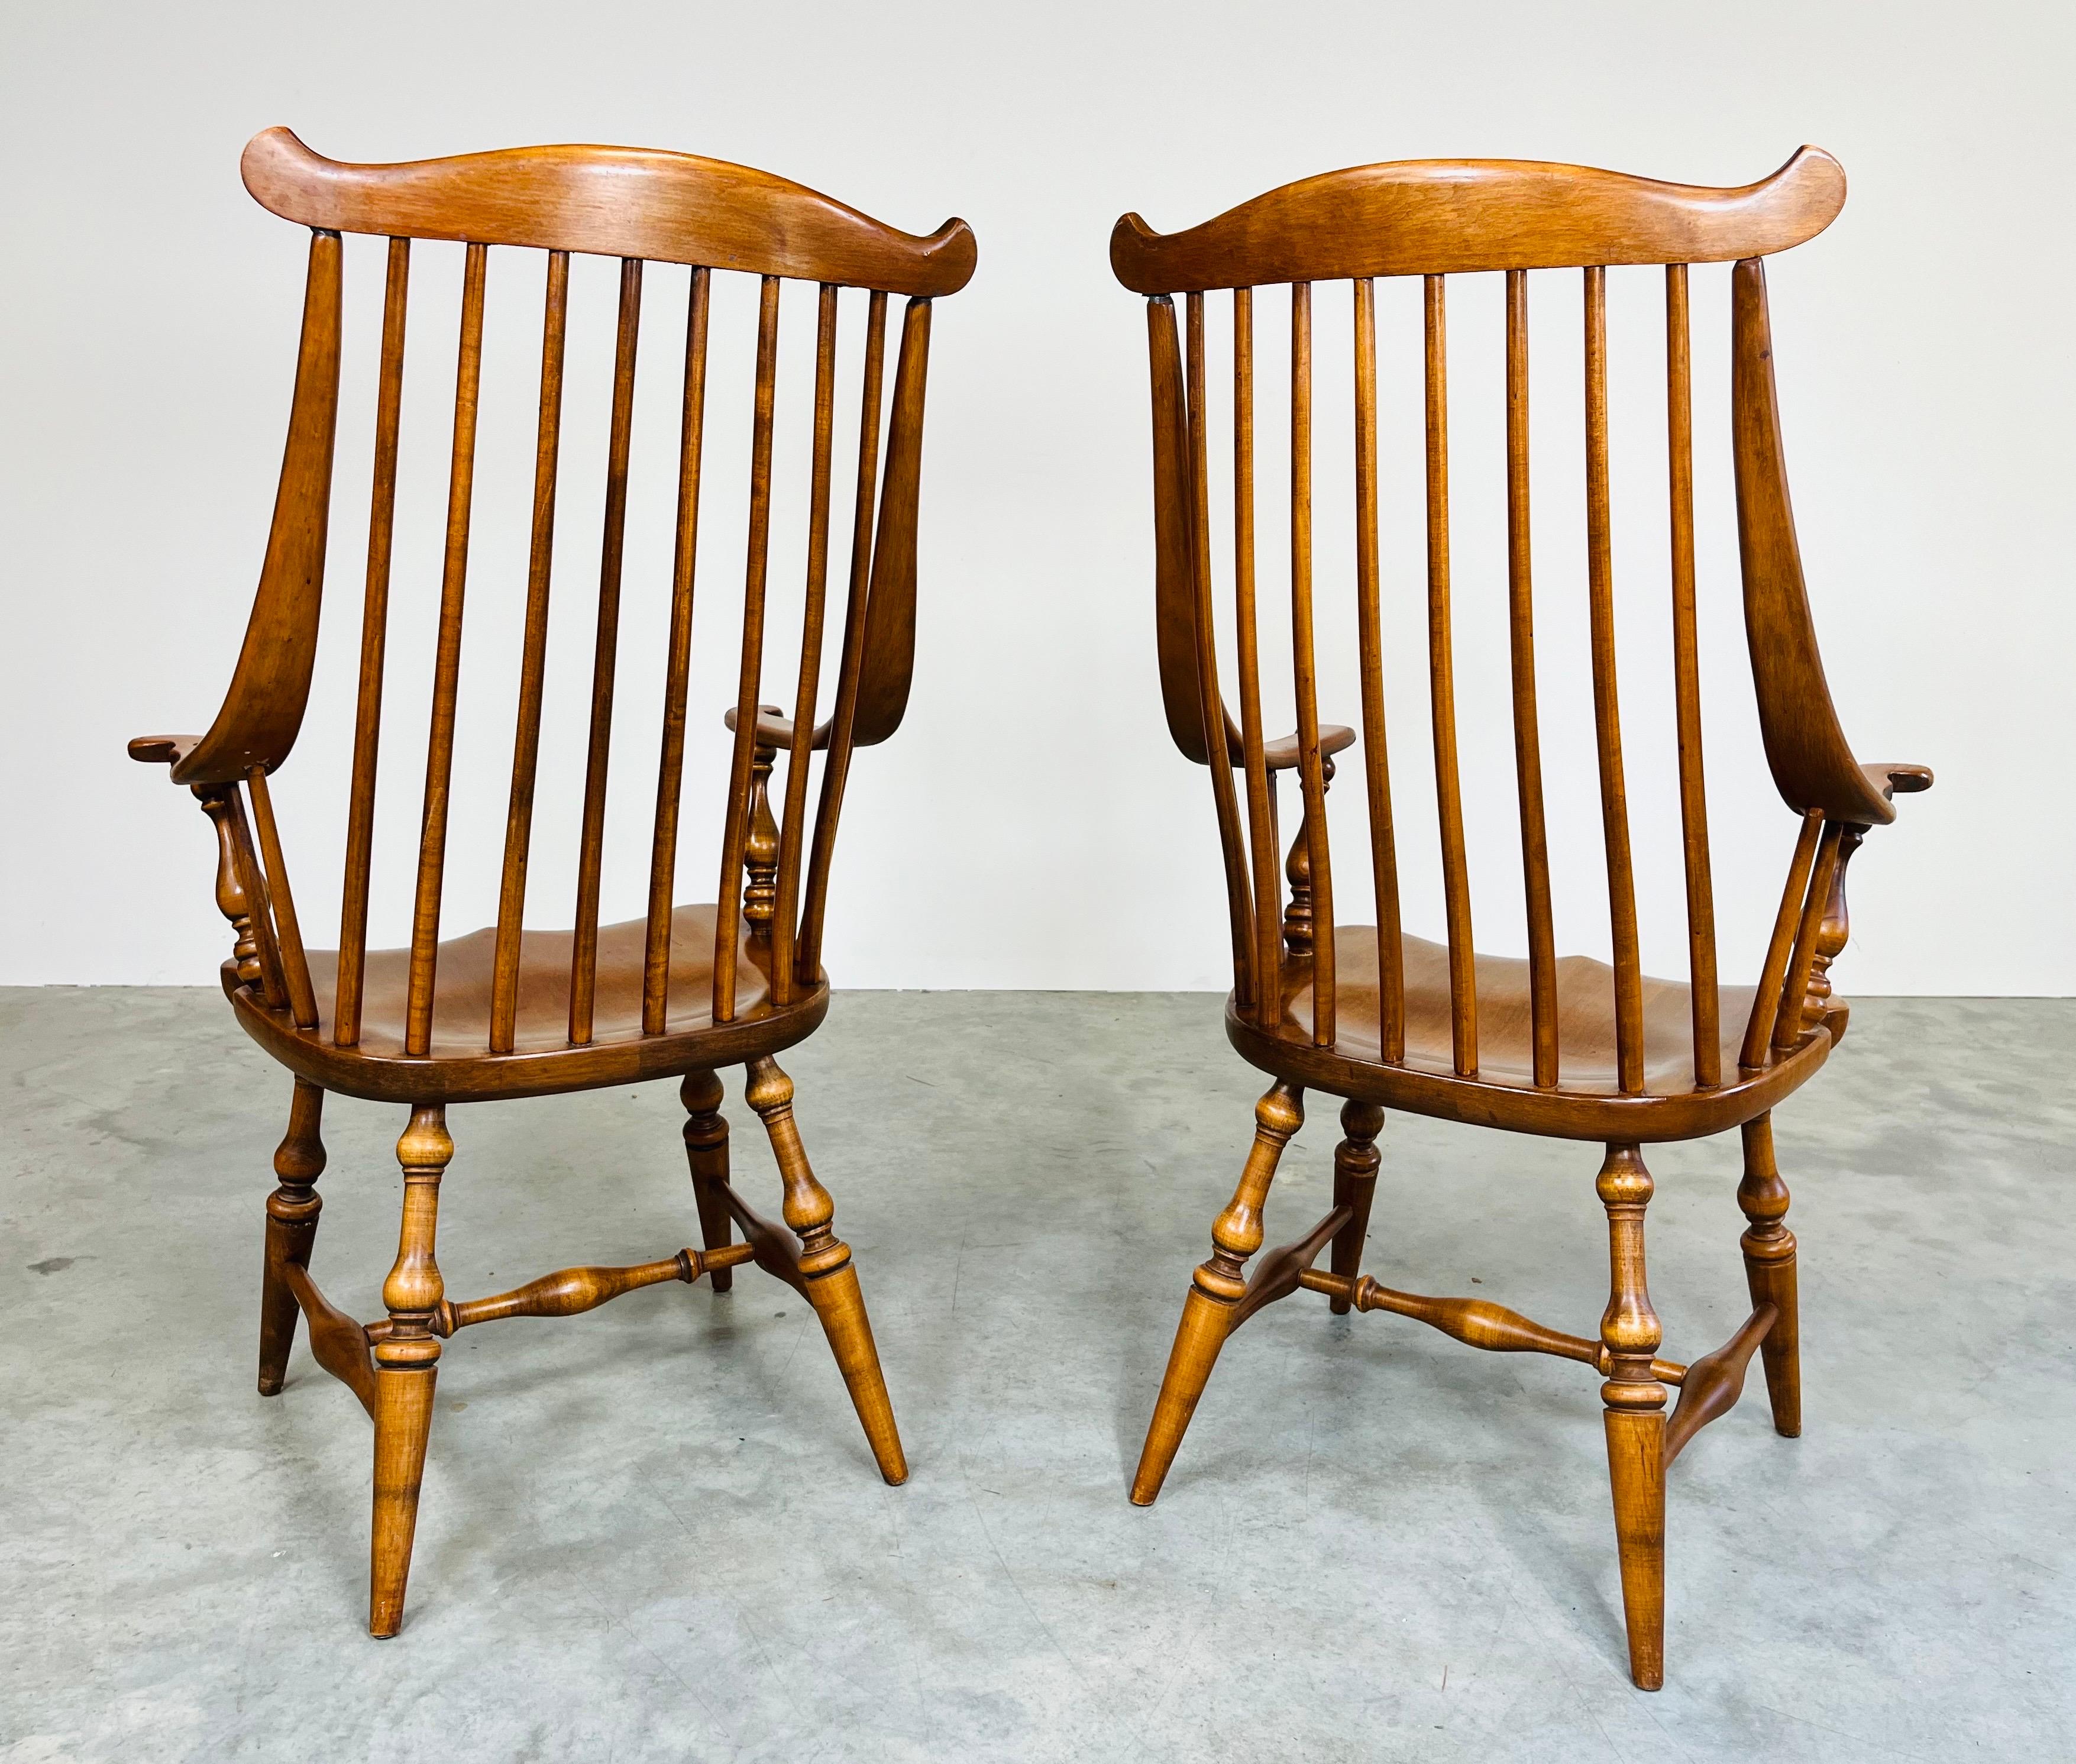 American Spindle Fan-Back Windsor Chairs By Heywood Wakefield 